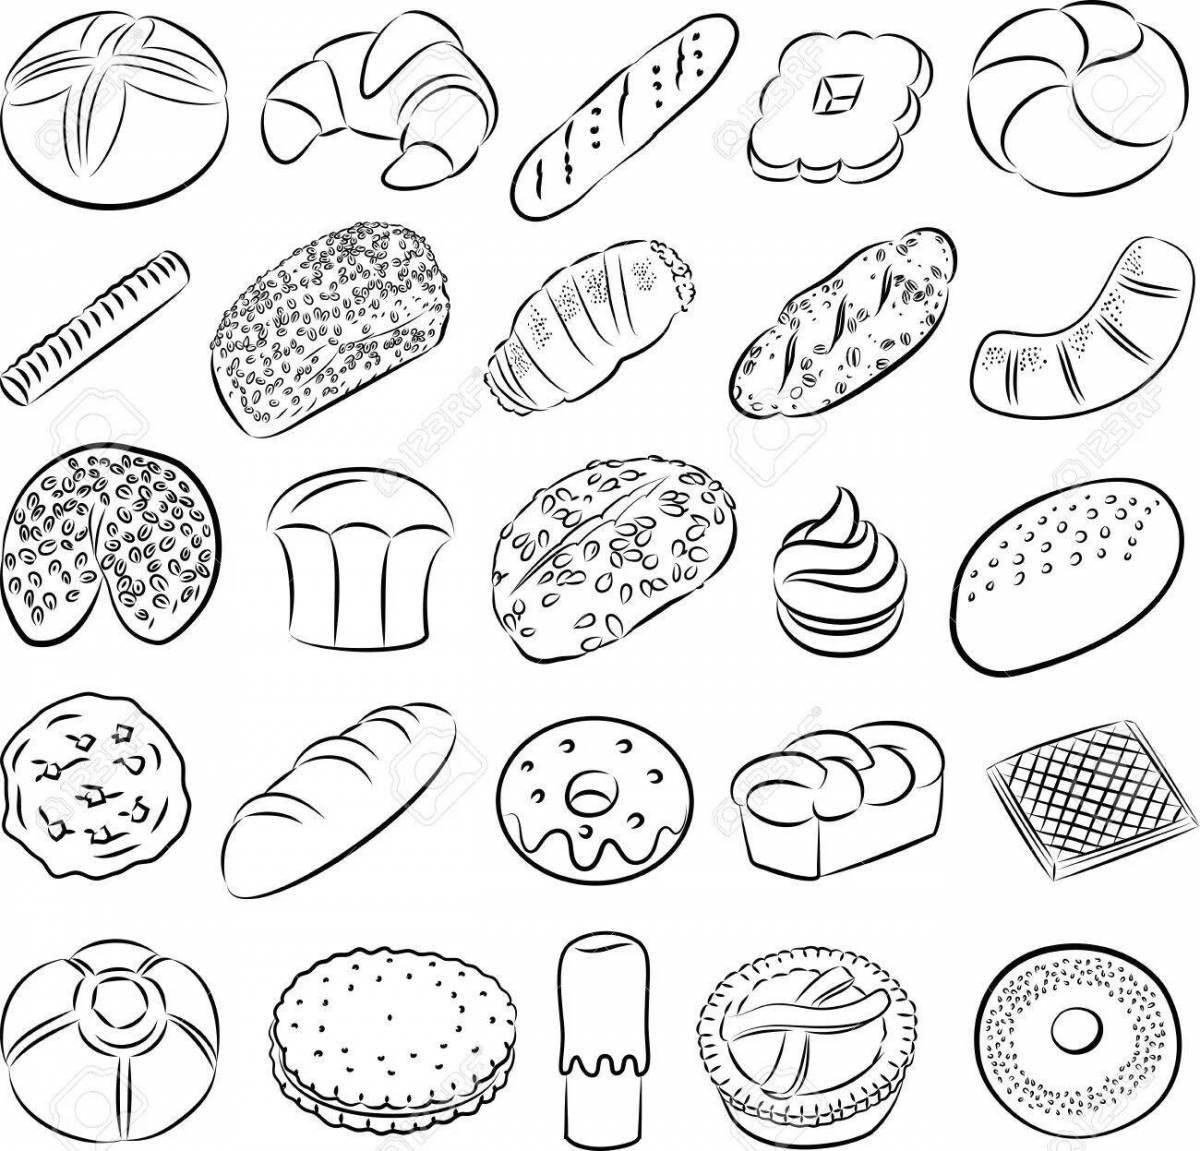 Savory baked goods coloring book for preschoolers